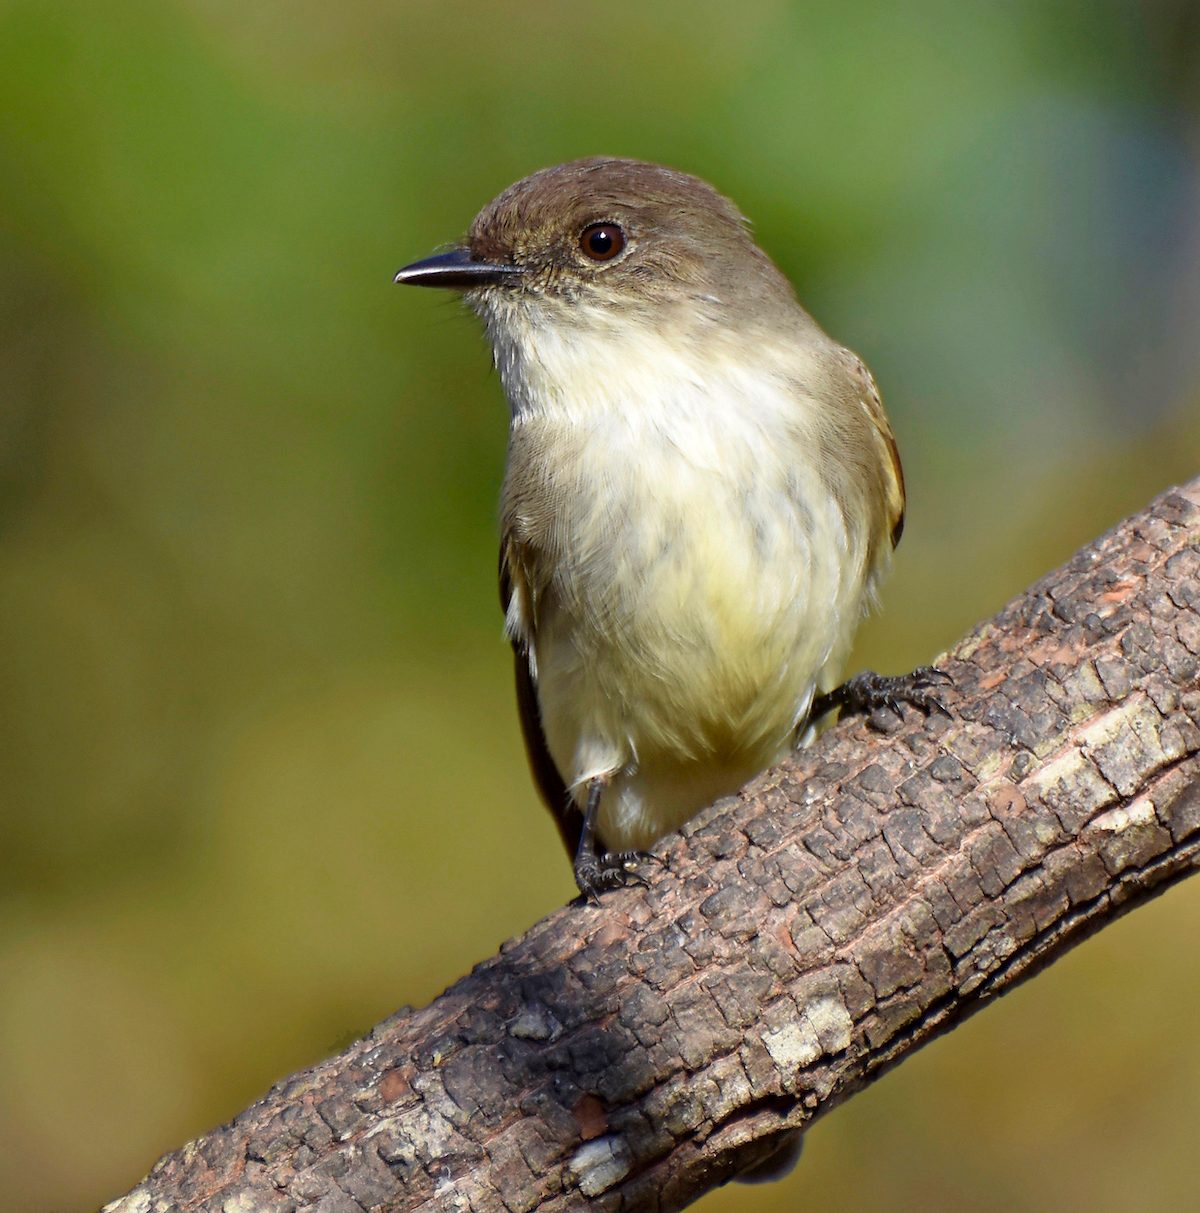 How to Identify an Eastern Phoebe